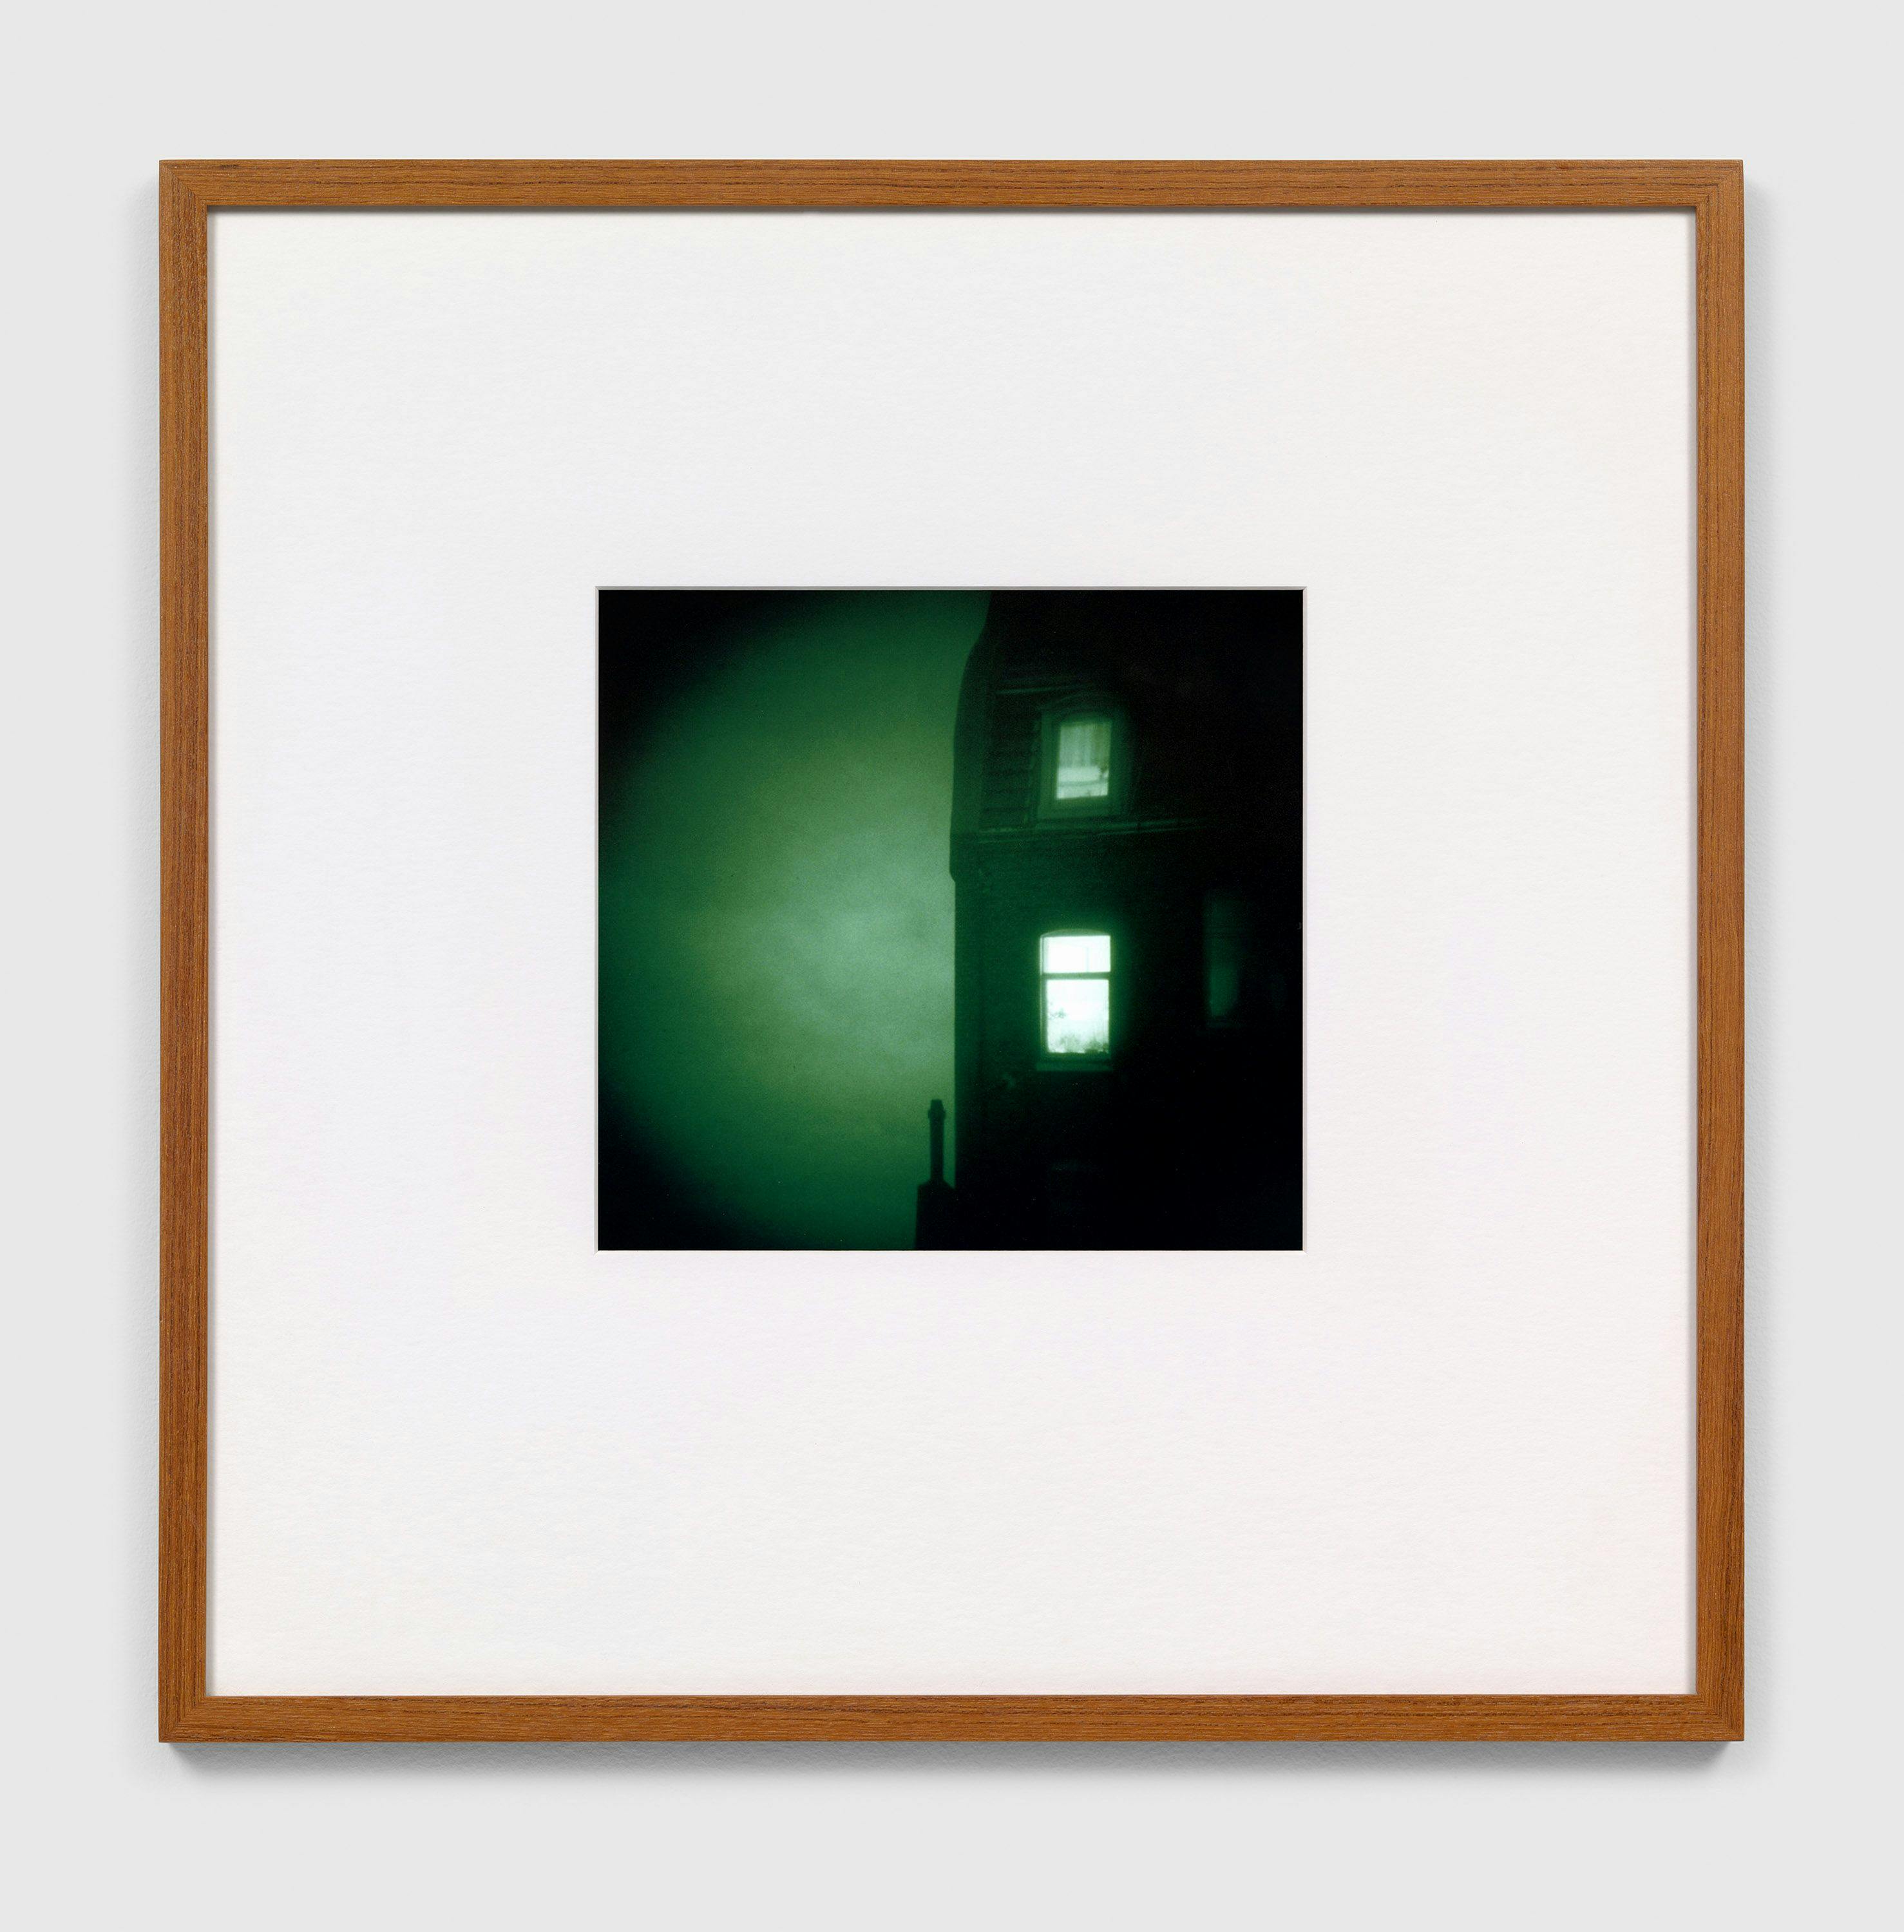 A photograph by Thomas Ruff, titled Nacht 8 II, dated 1992.